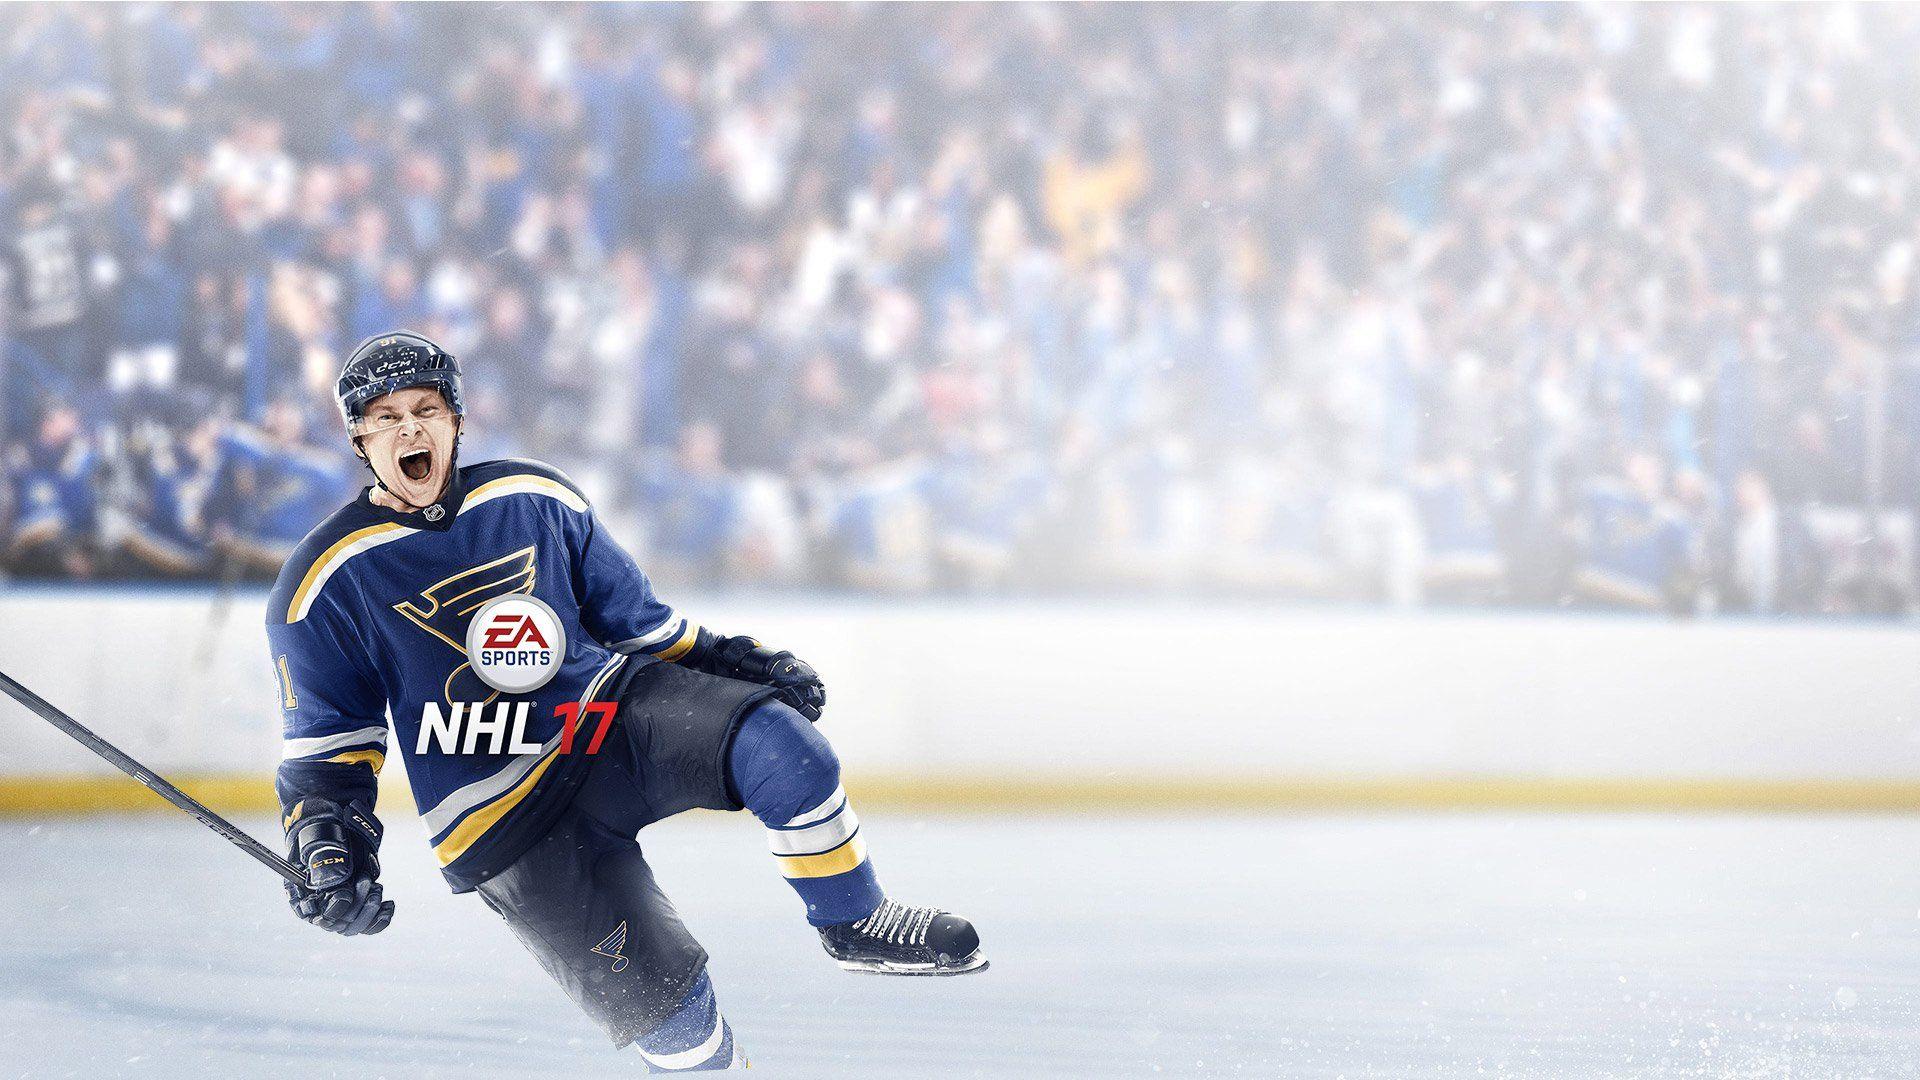 Wallpaper NHL Ice Hockey, World Cup, PS Xbox, Games